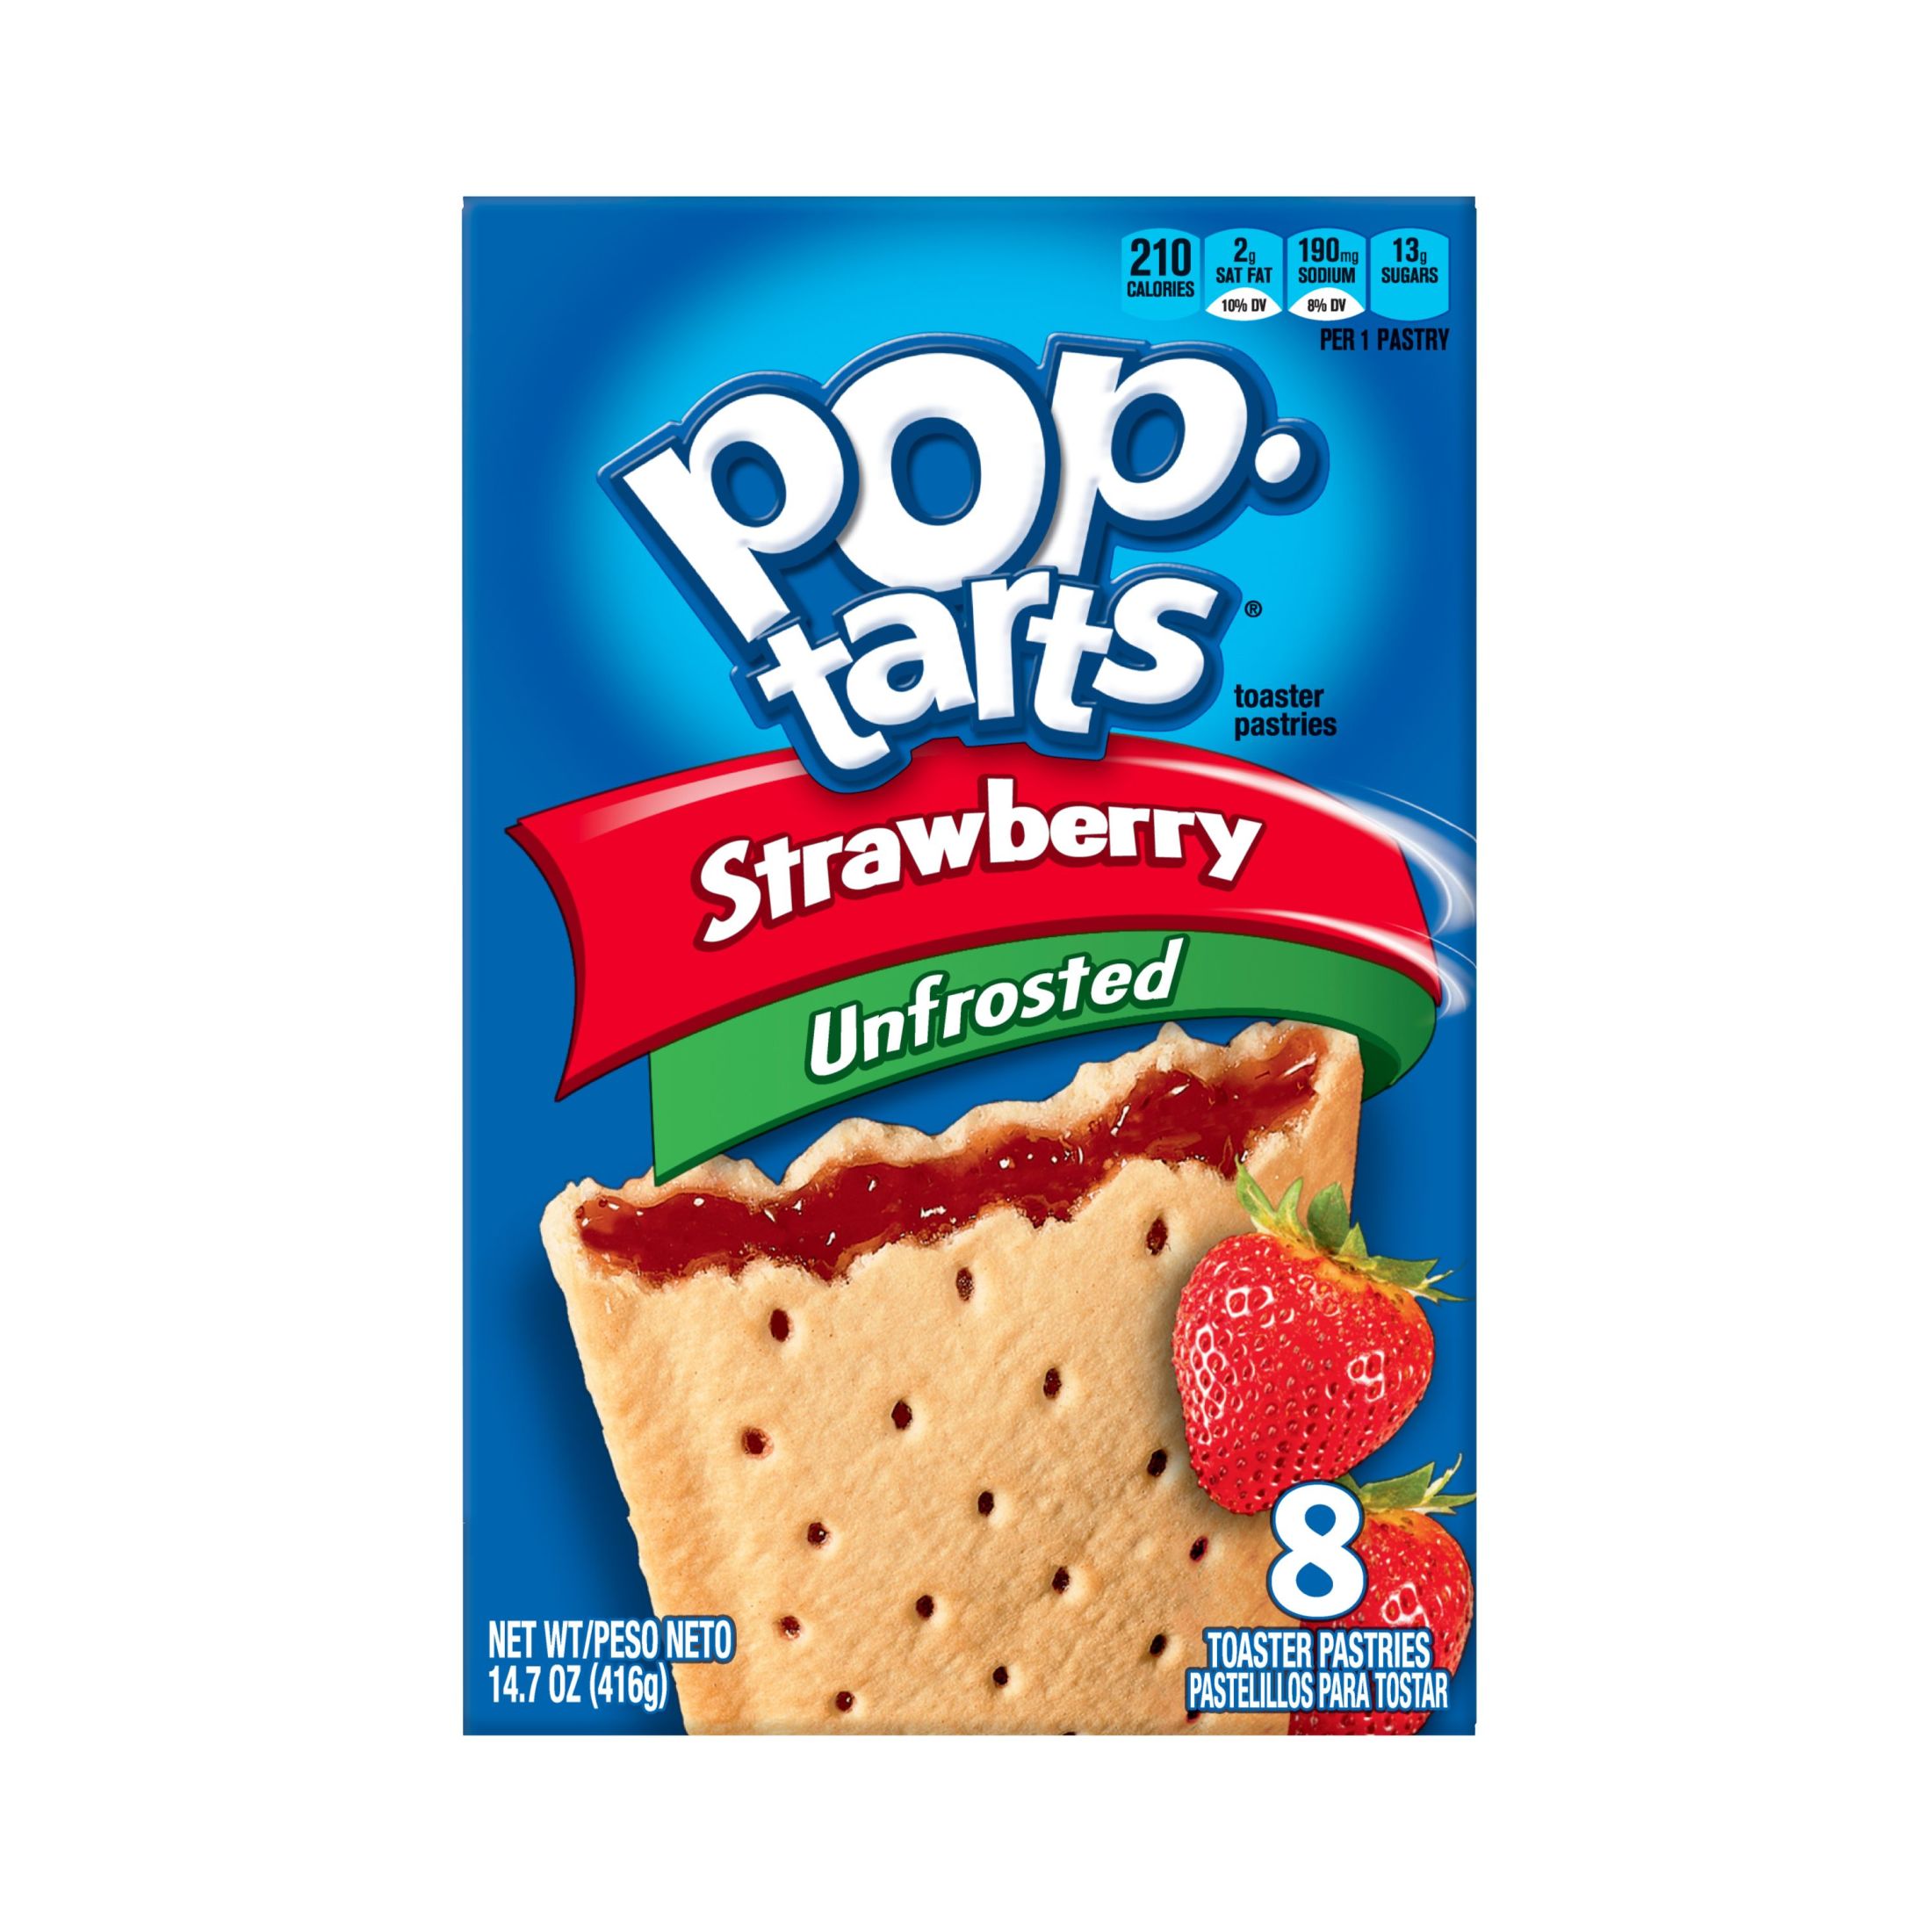 Pop-Tarts Unfrosted Strawberry Breakfast Toaster Pastries, 14.7 oz, 8 Count - image 1 of 9